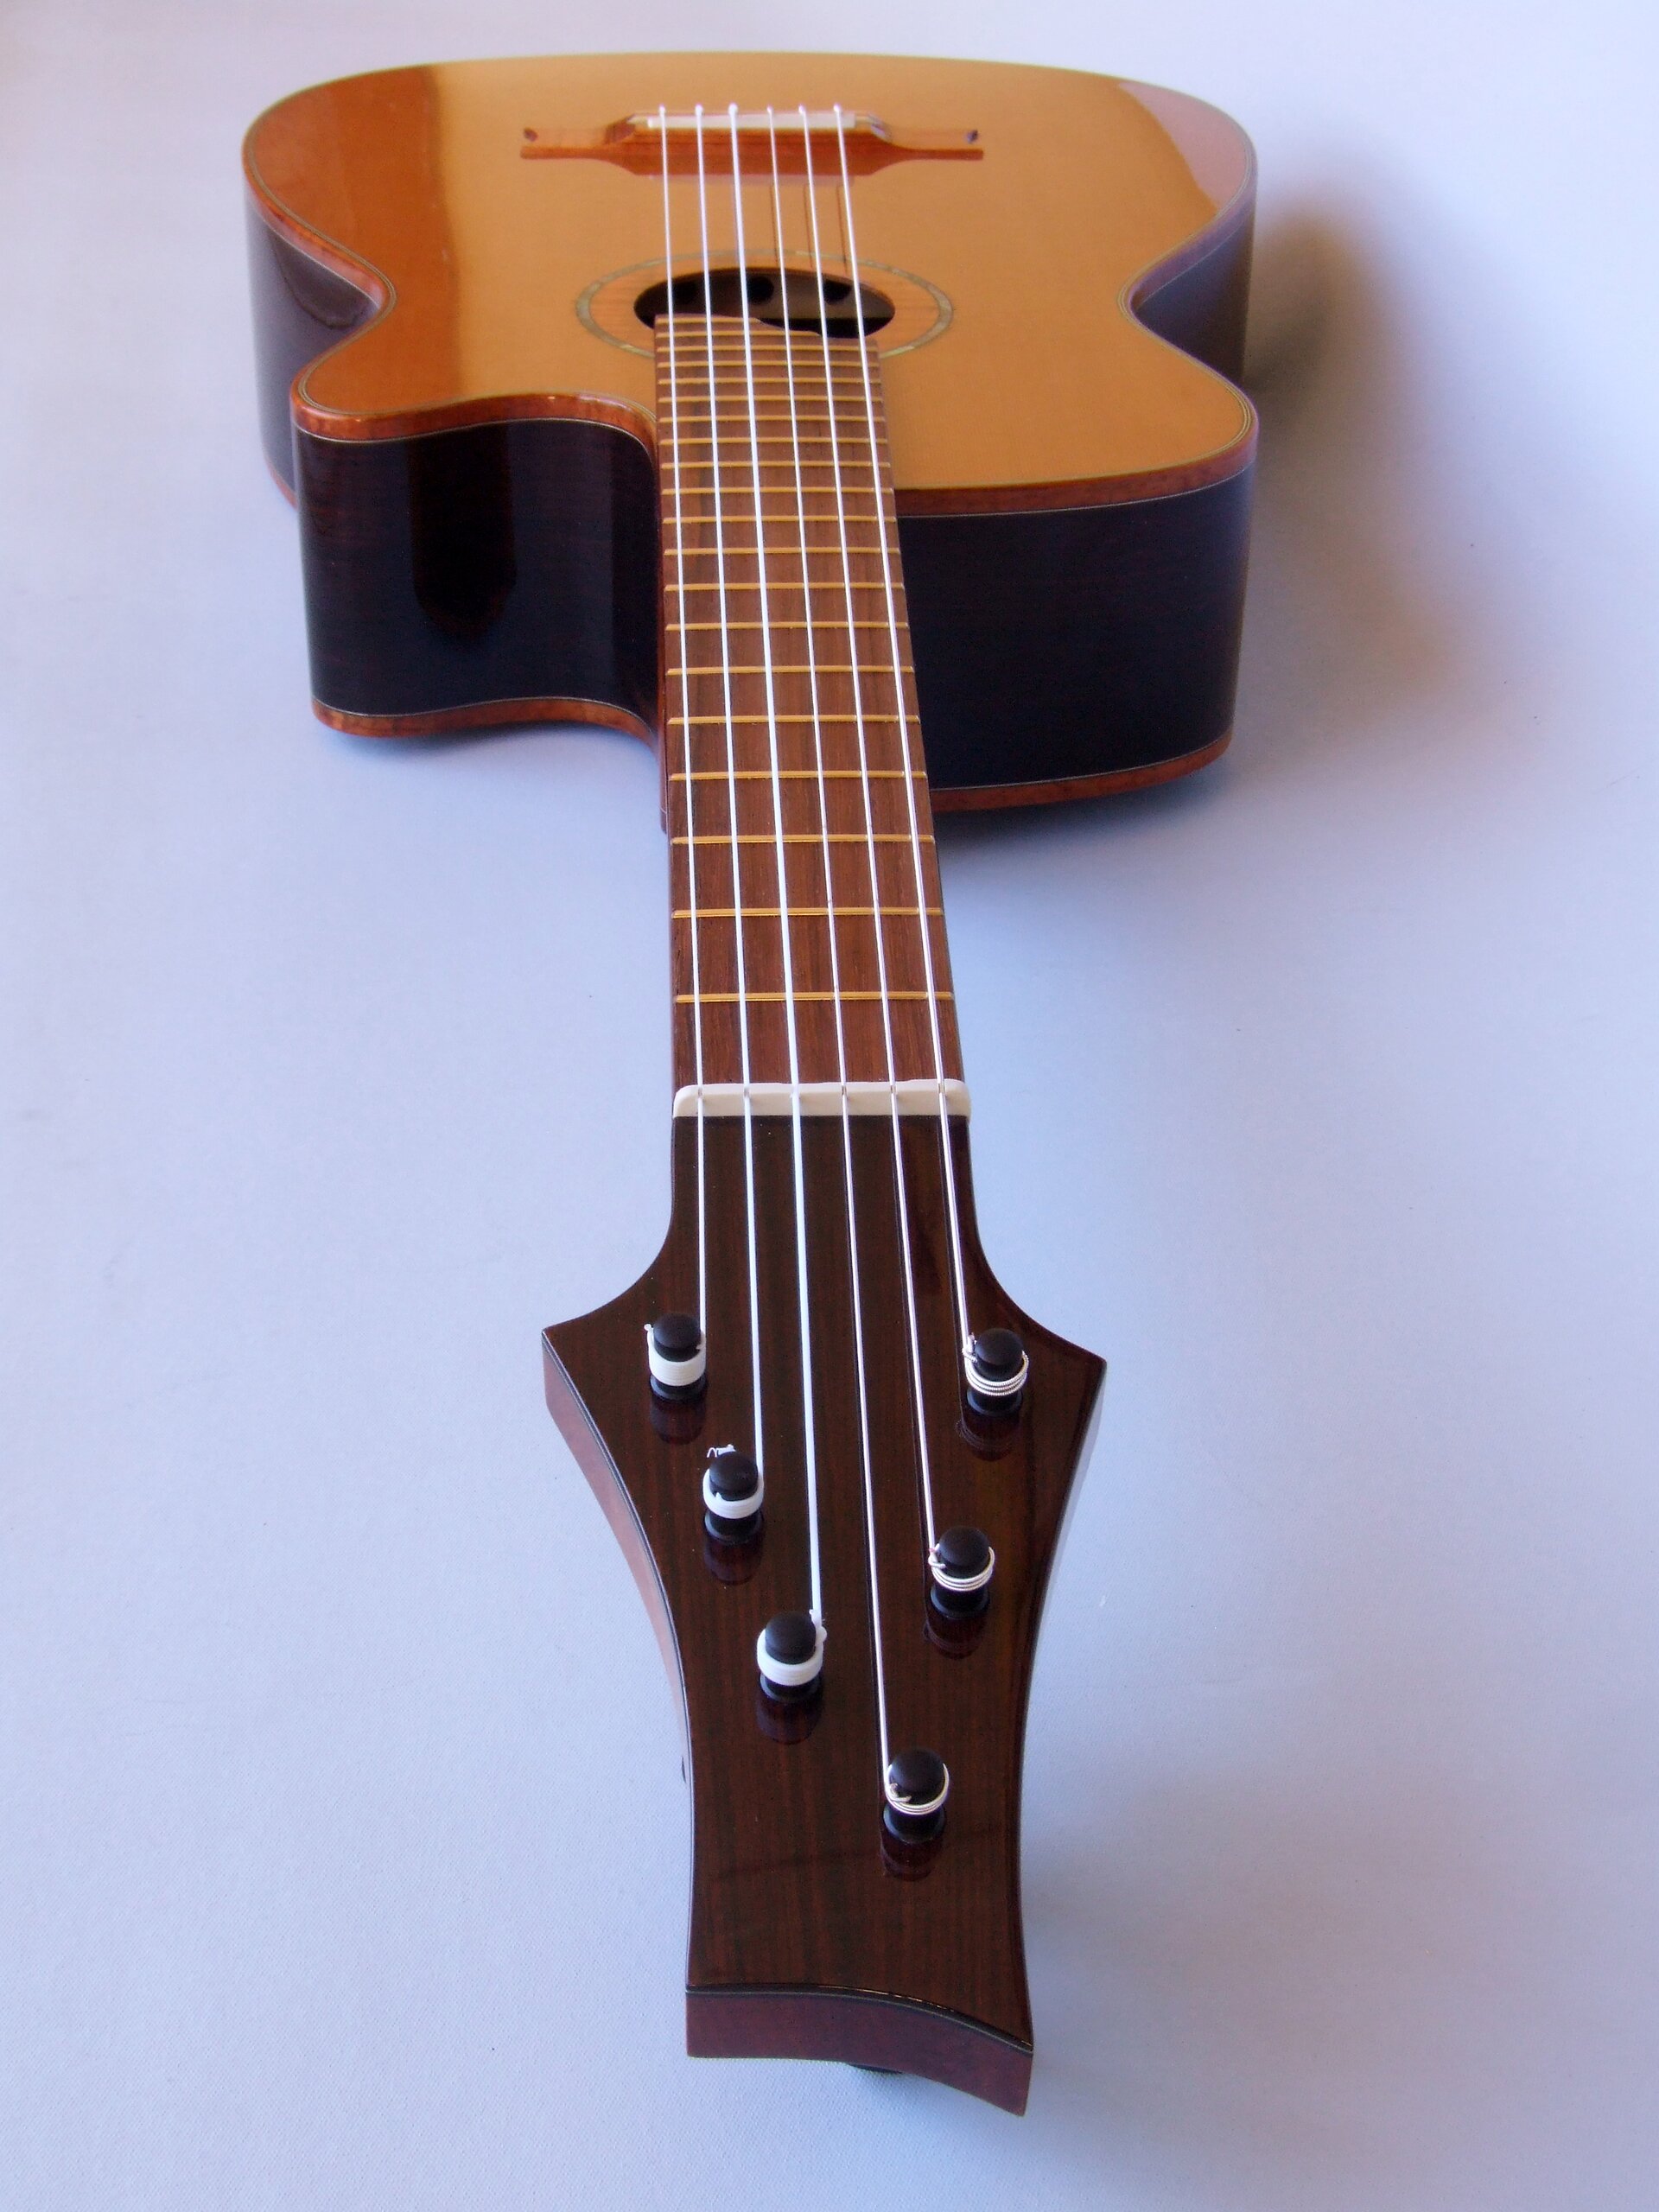 Looking down the neck of a cedar topped cutaway classical guitar with planetary peg tuners